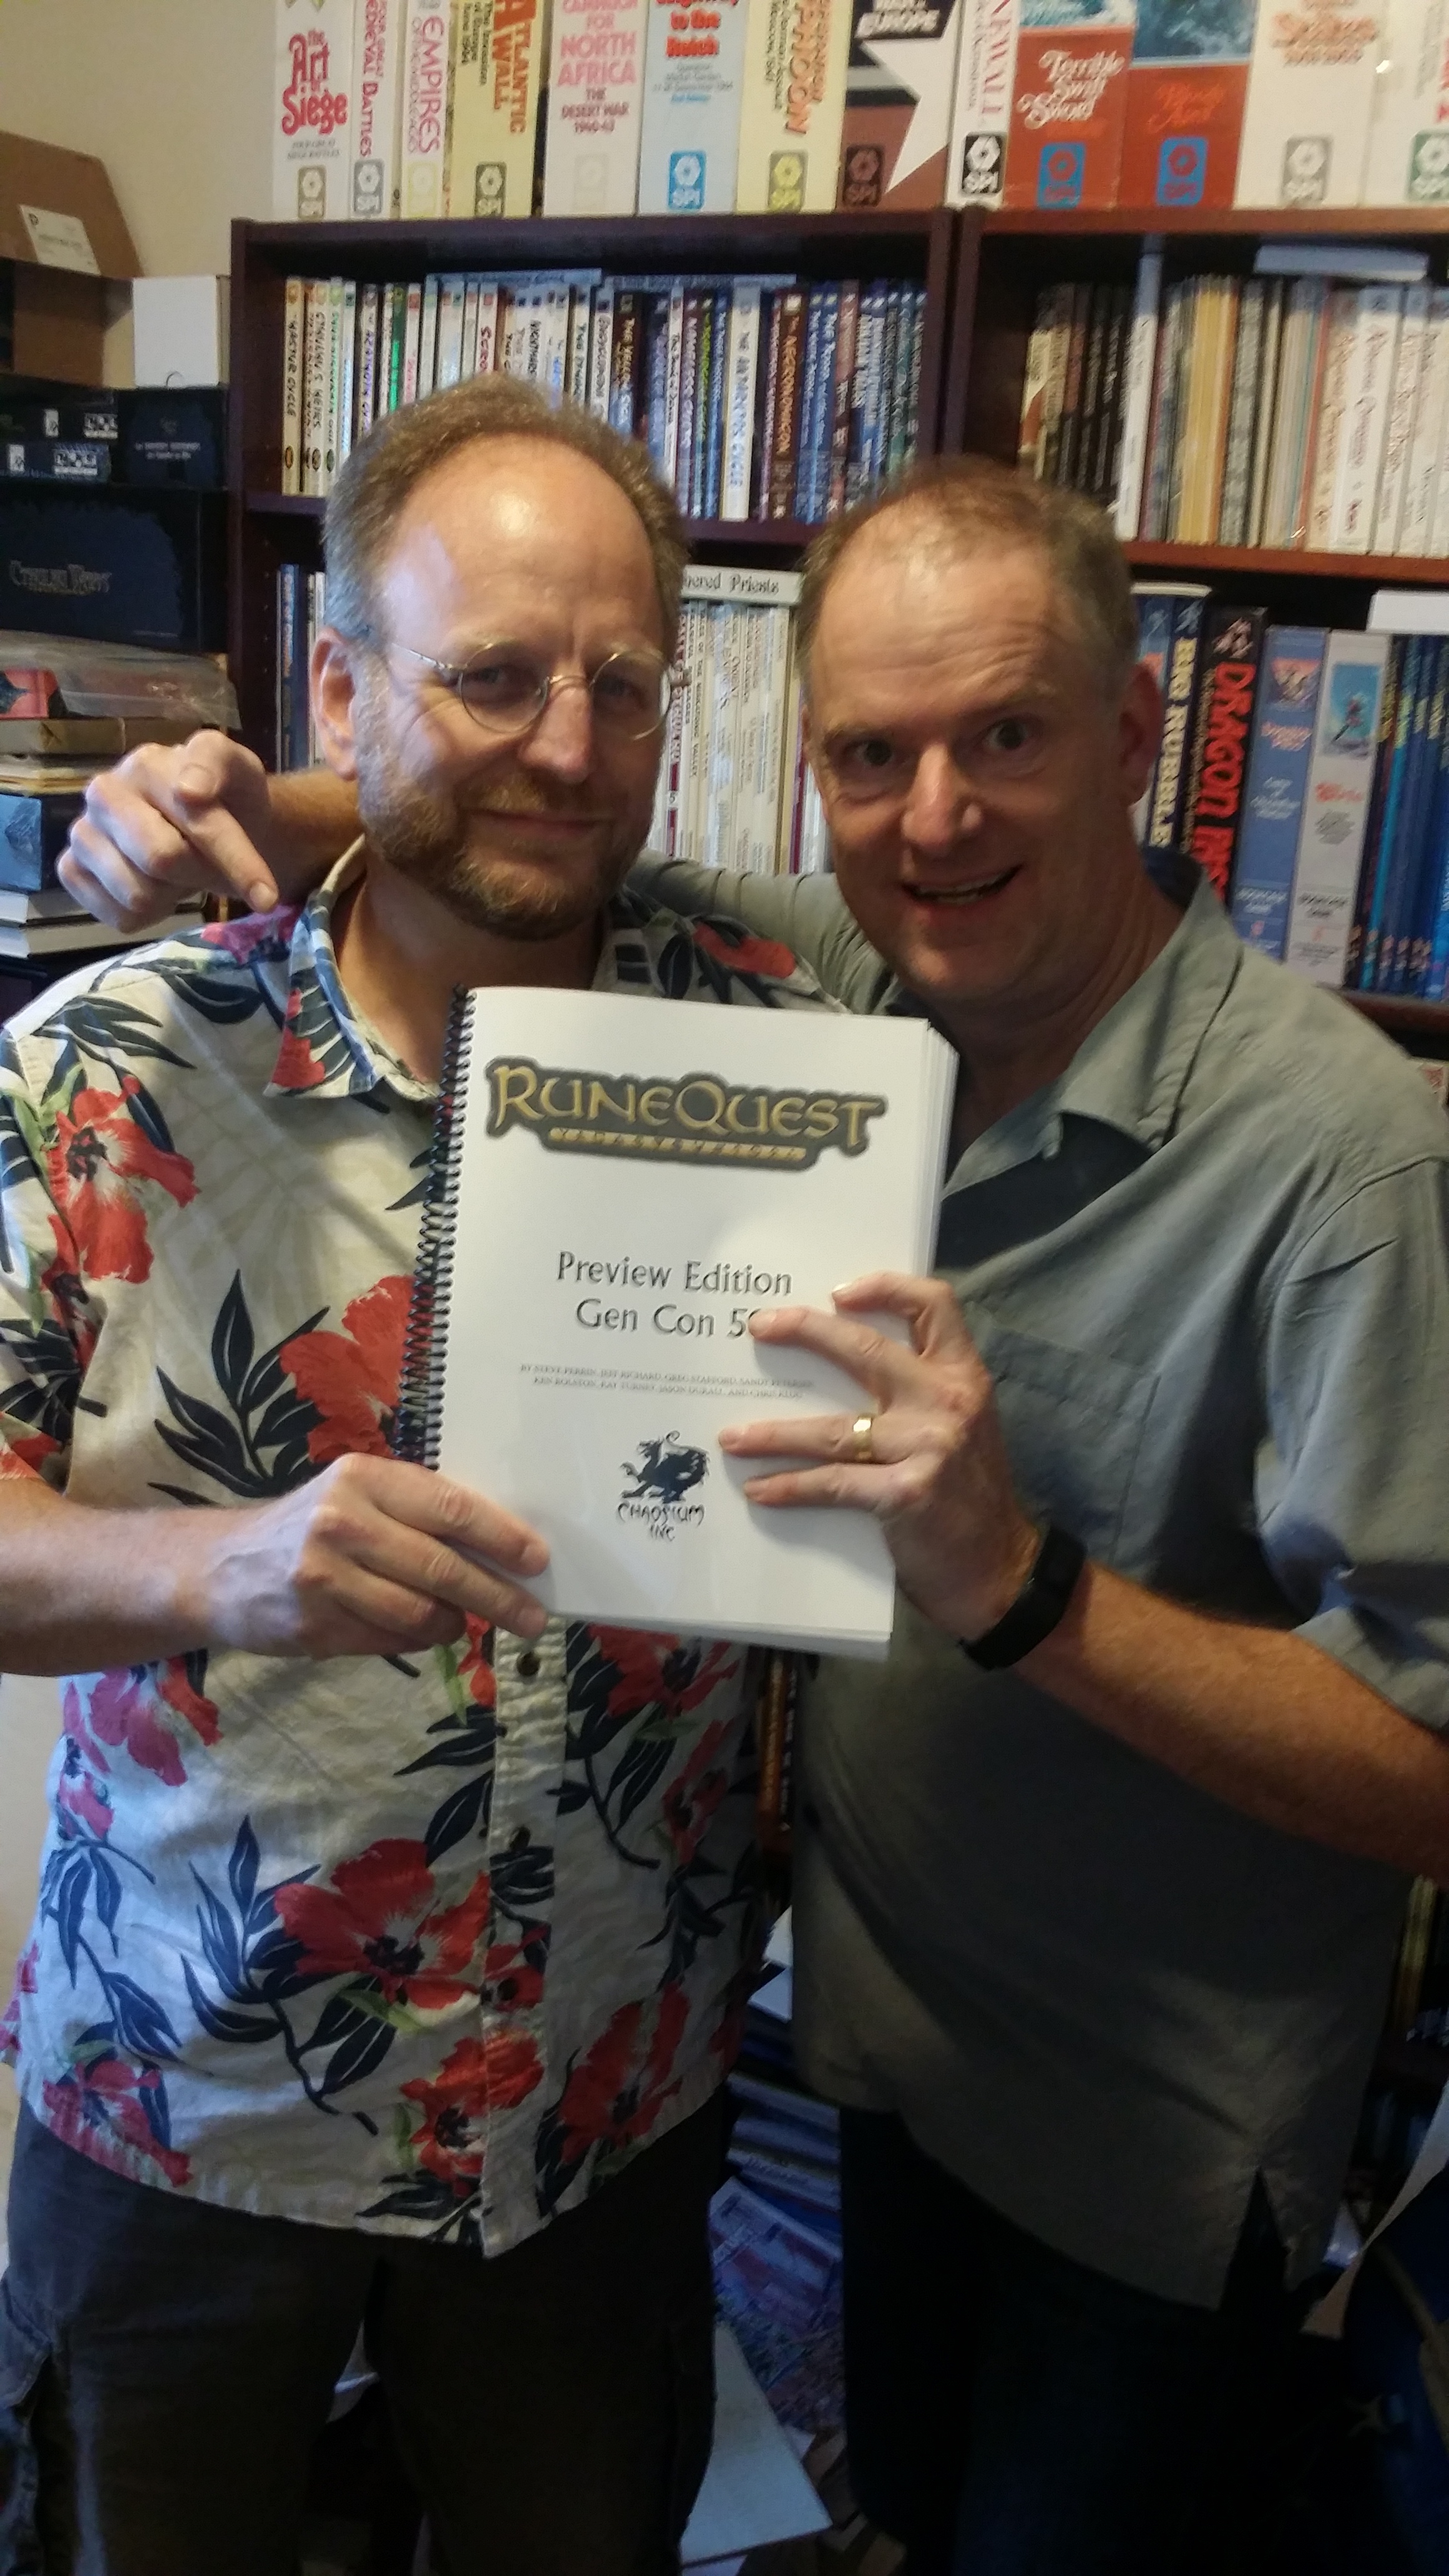 Rick and Jeff, showing off the special RuneQuest preview copies